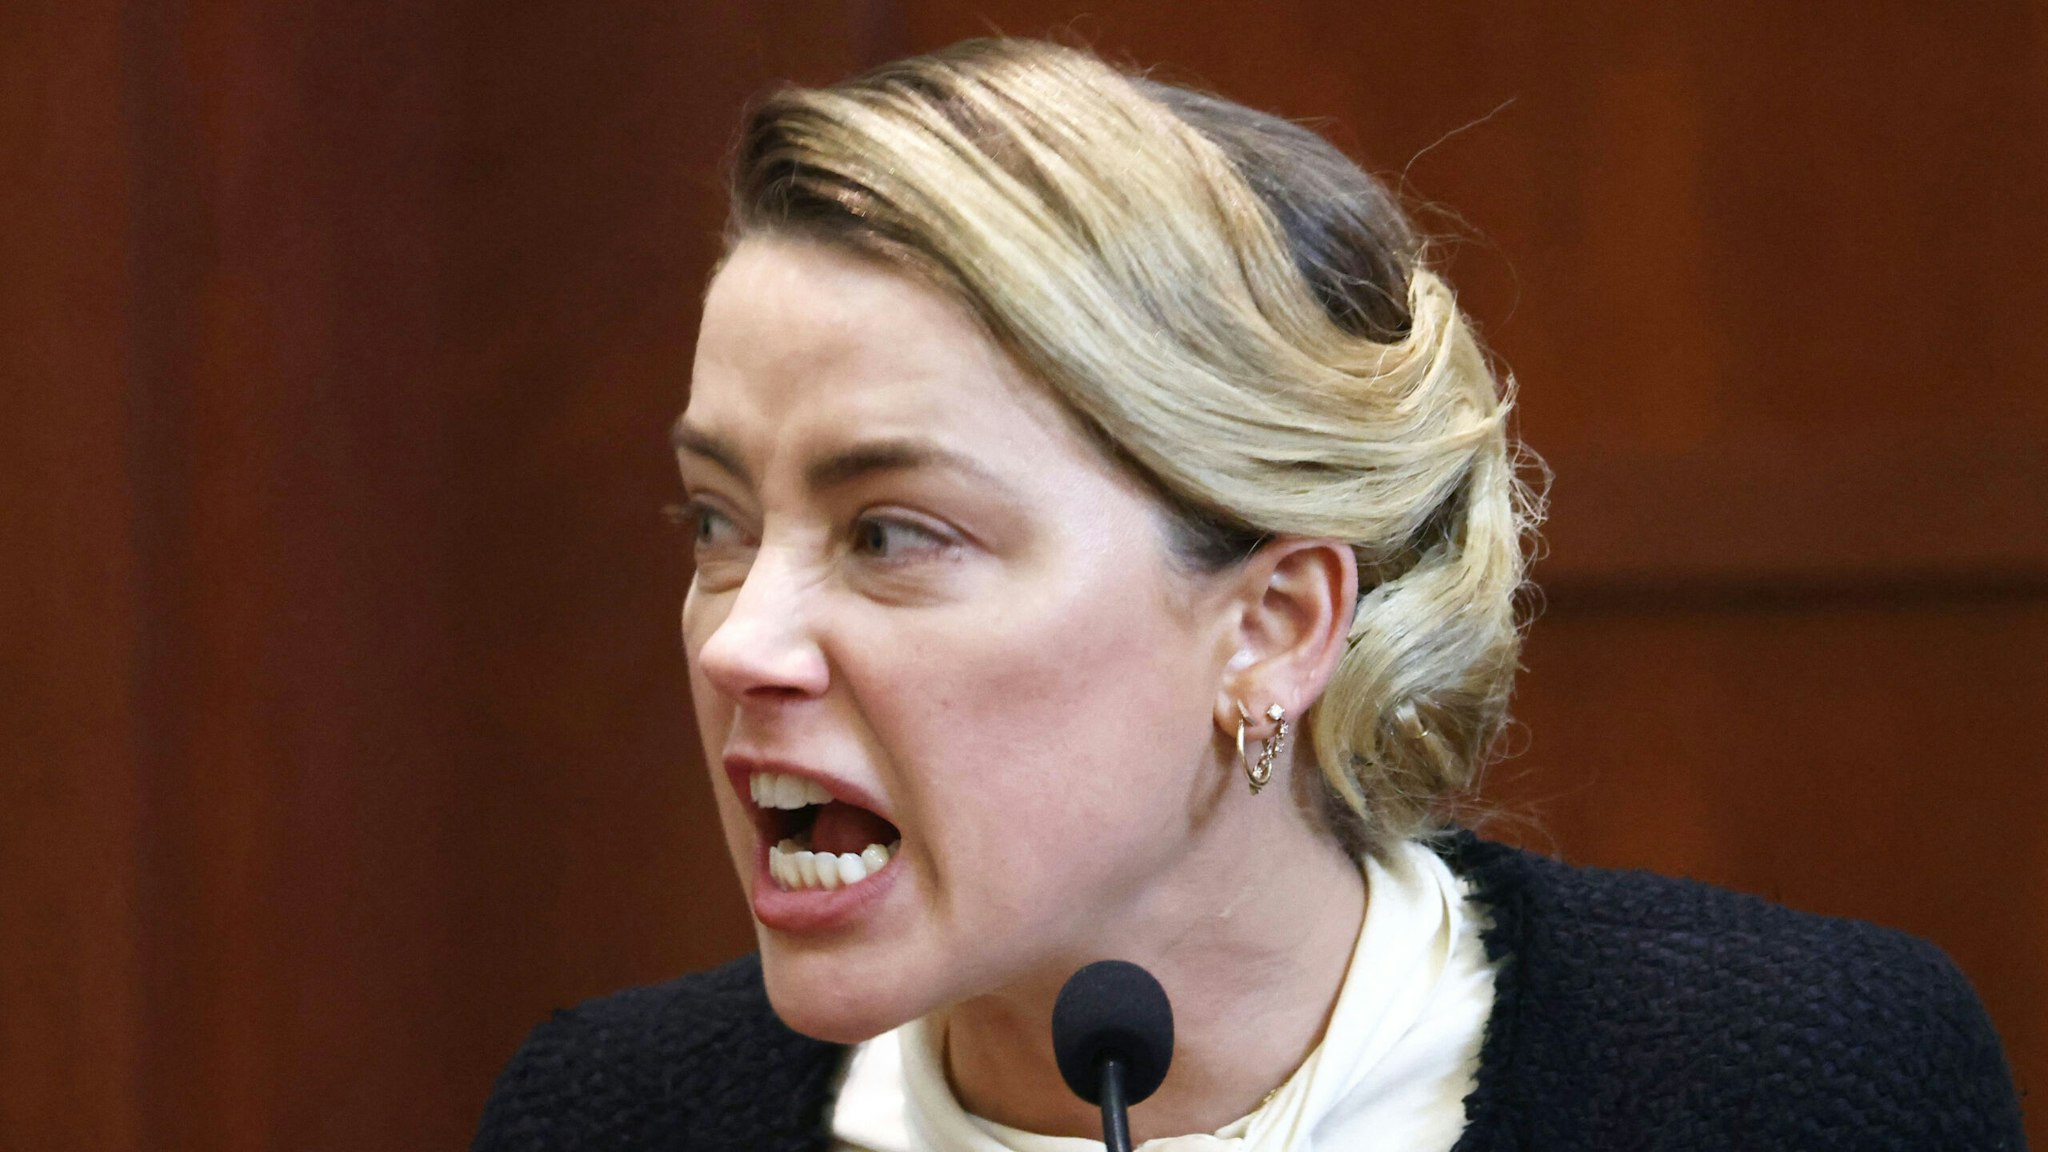 TOPSHOT - US actress Amber Heard testifies at the Fairfax County Circuit Courthouse in Fairfax, Virginia, on May 5, 2022. - Actor Johnny Depp is suing ex-wife Amber Heard for libel after she wrote an op-ed piece in The Washington Post in 2018 referring to herself as a public figure representing domestic abuse.